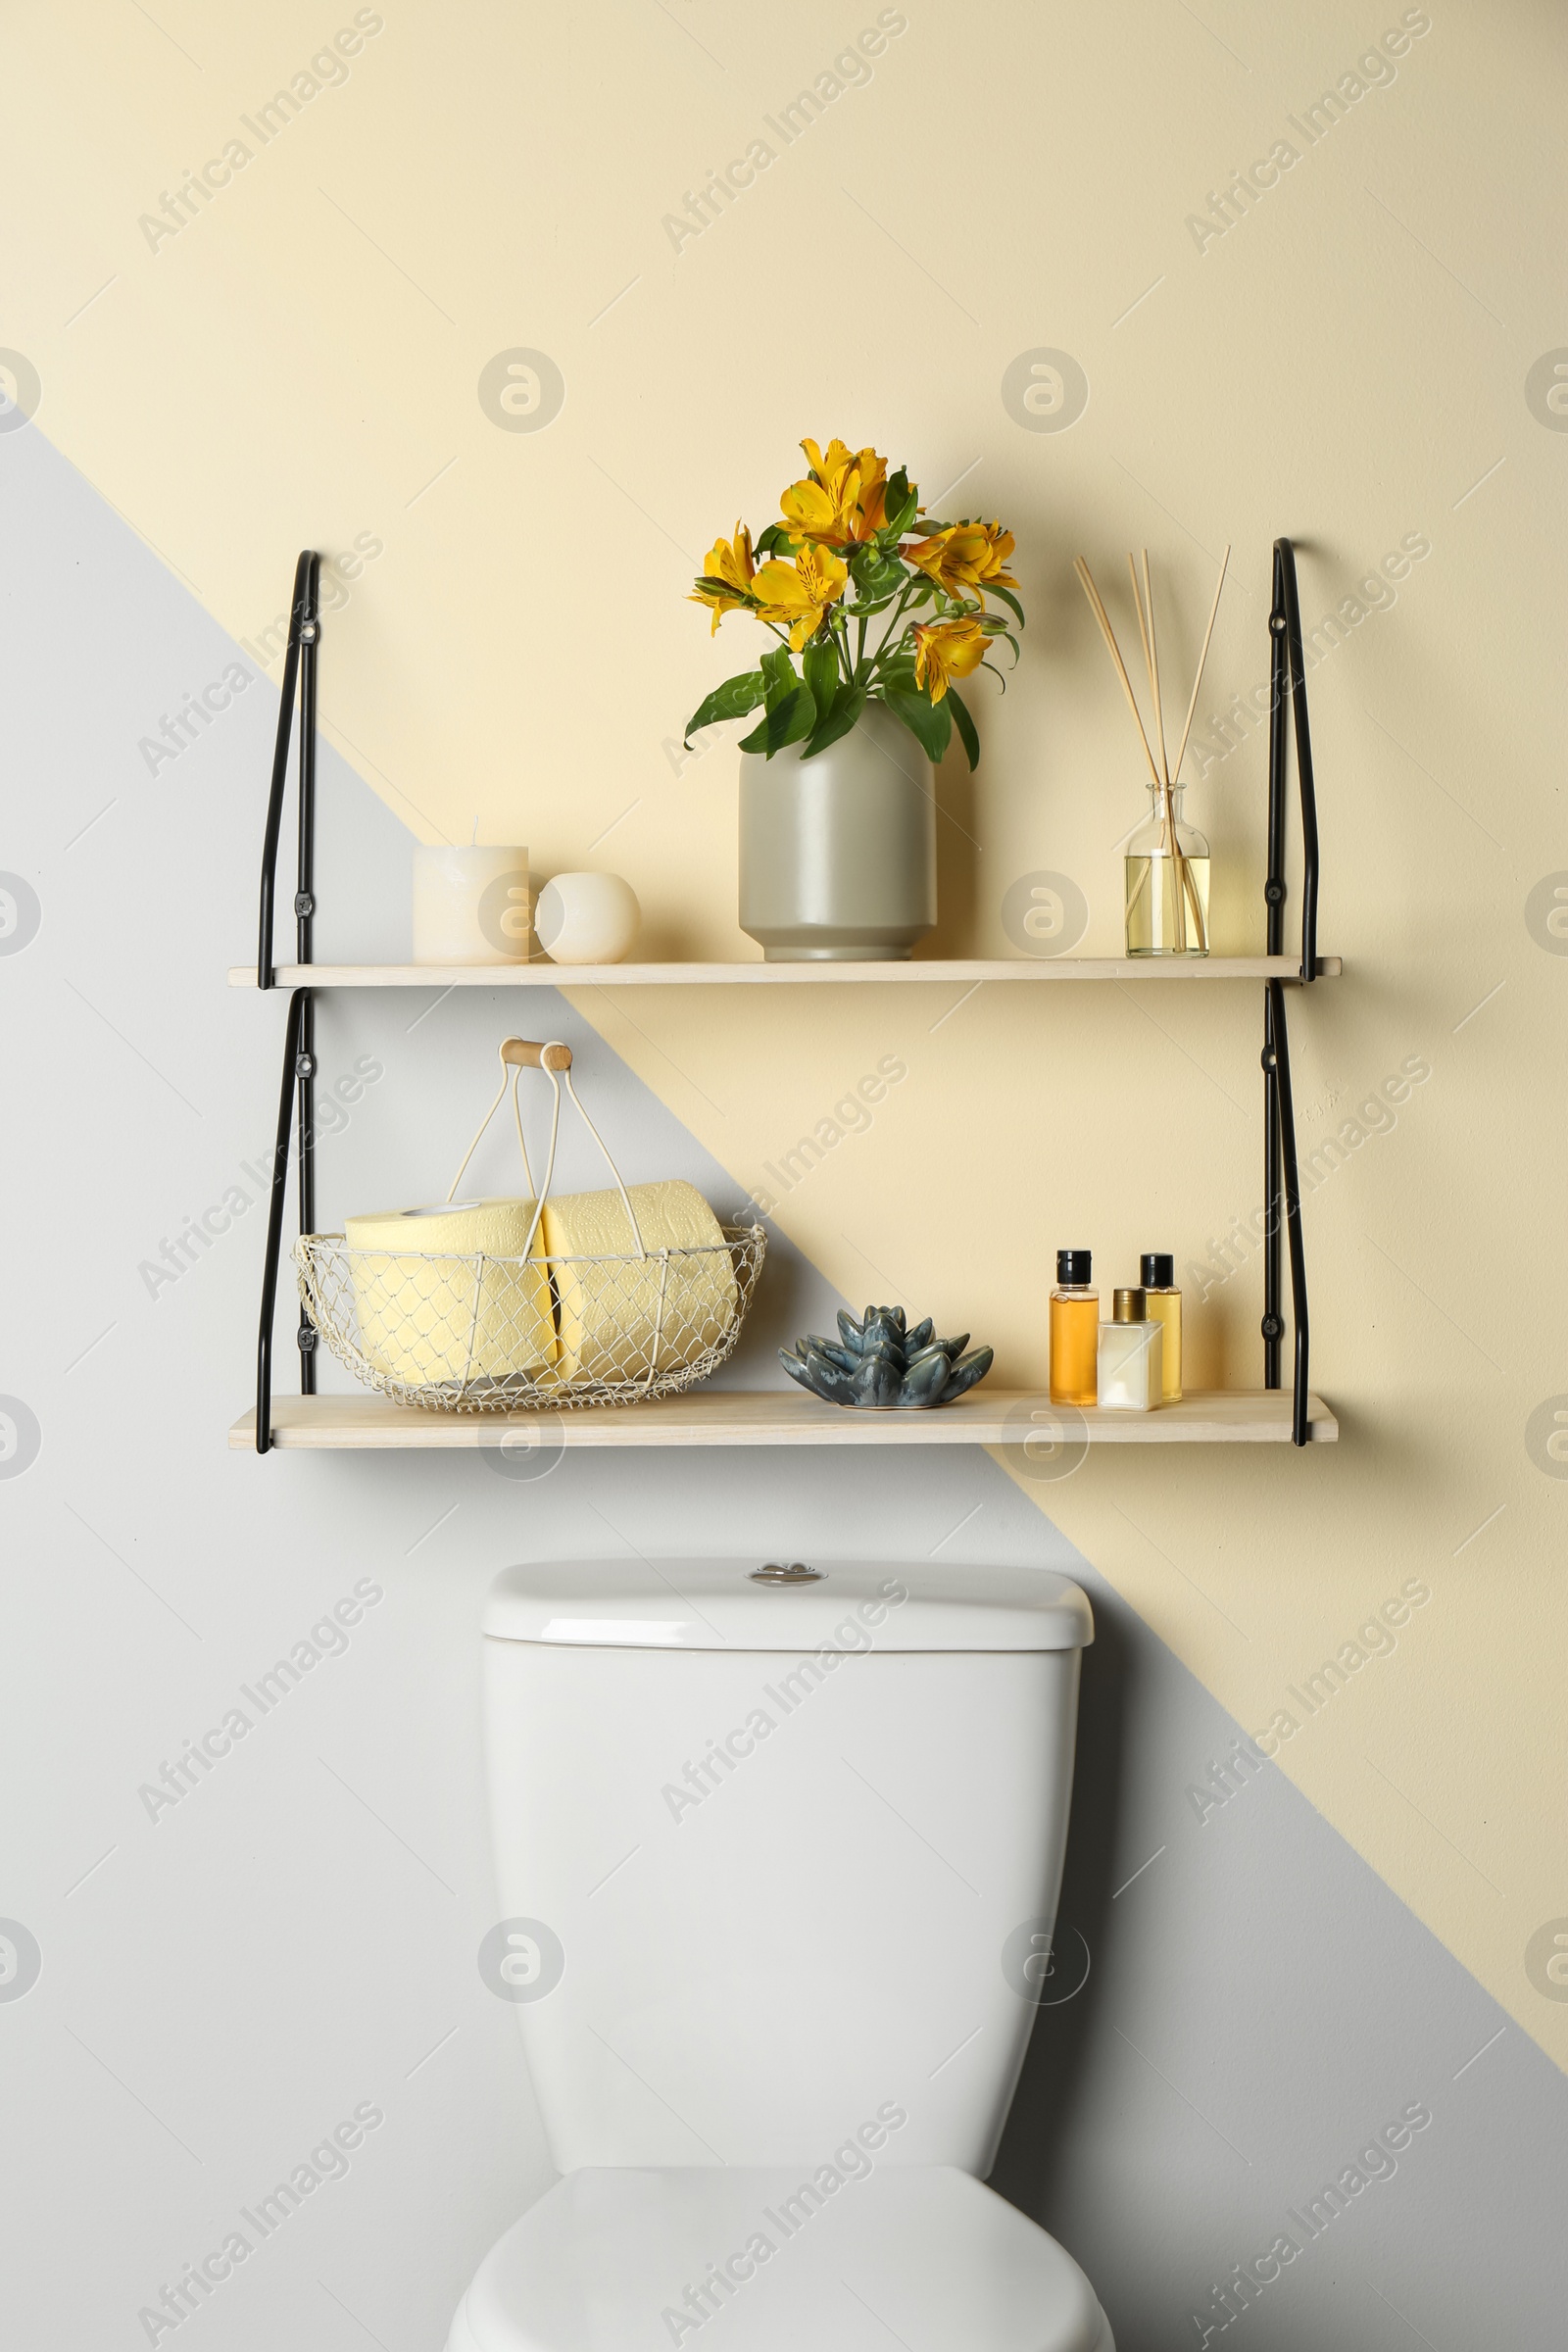 Photo of Shelves with different stuff on wall above toilet bowl in restroom interior